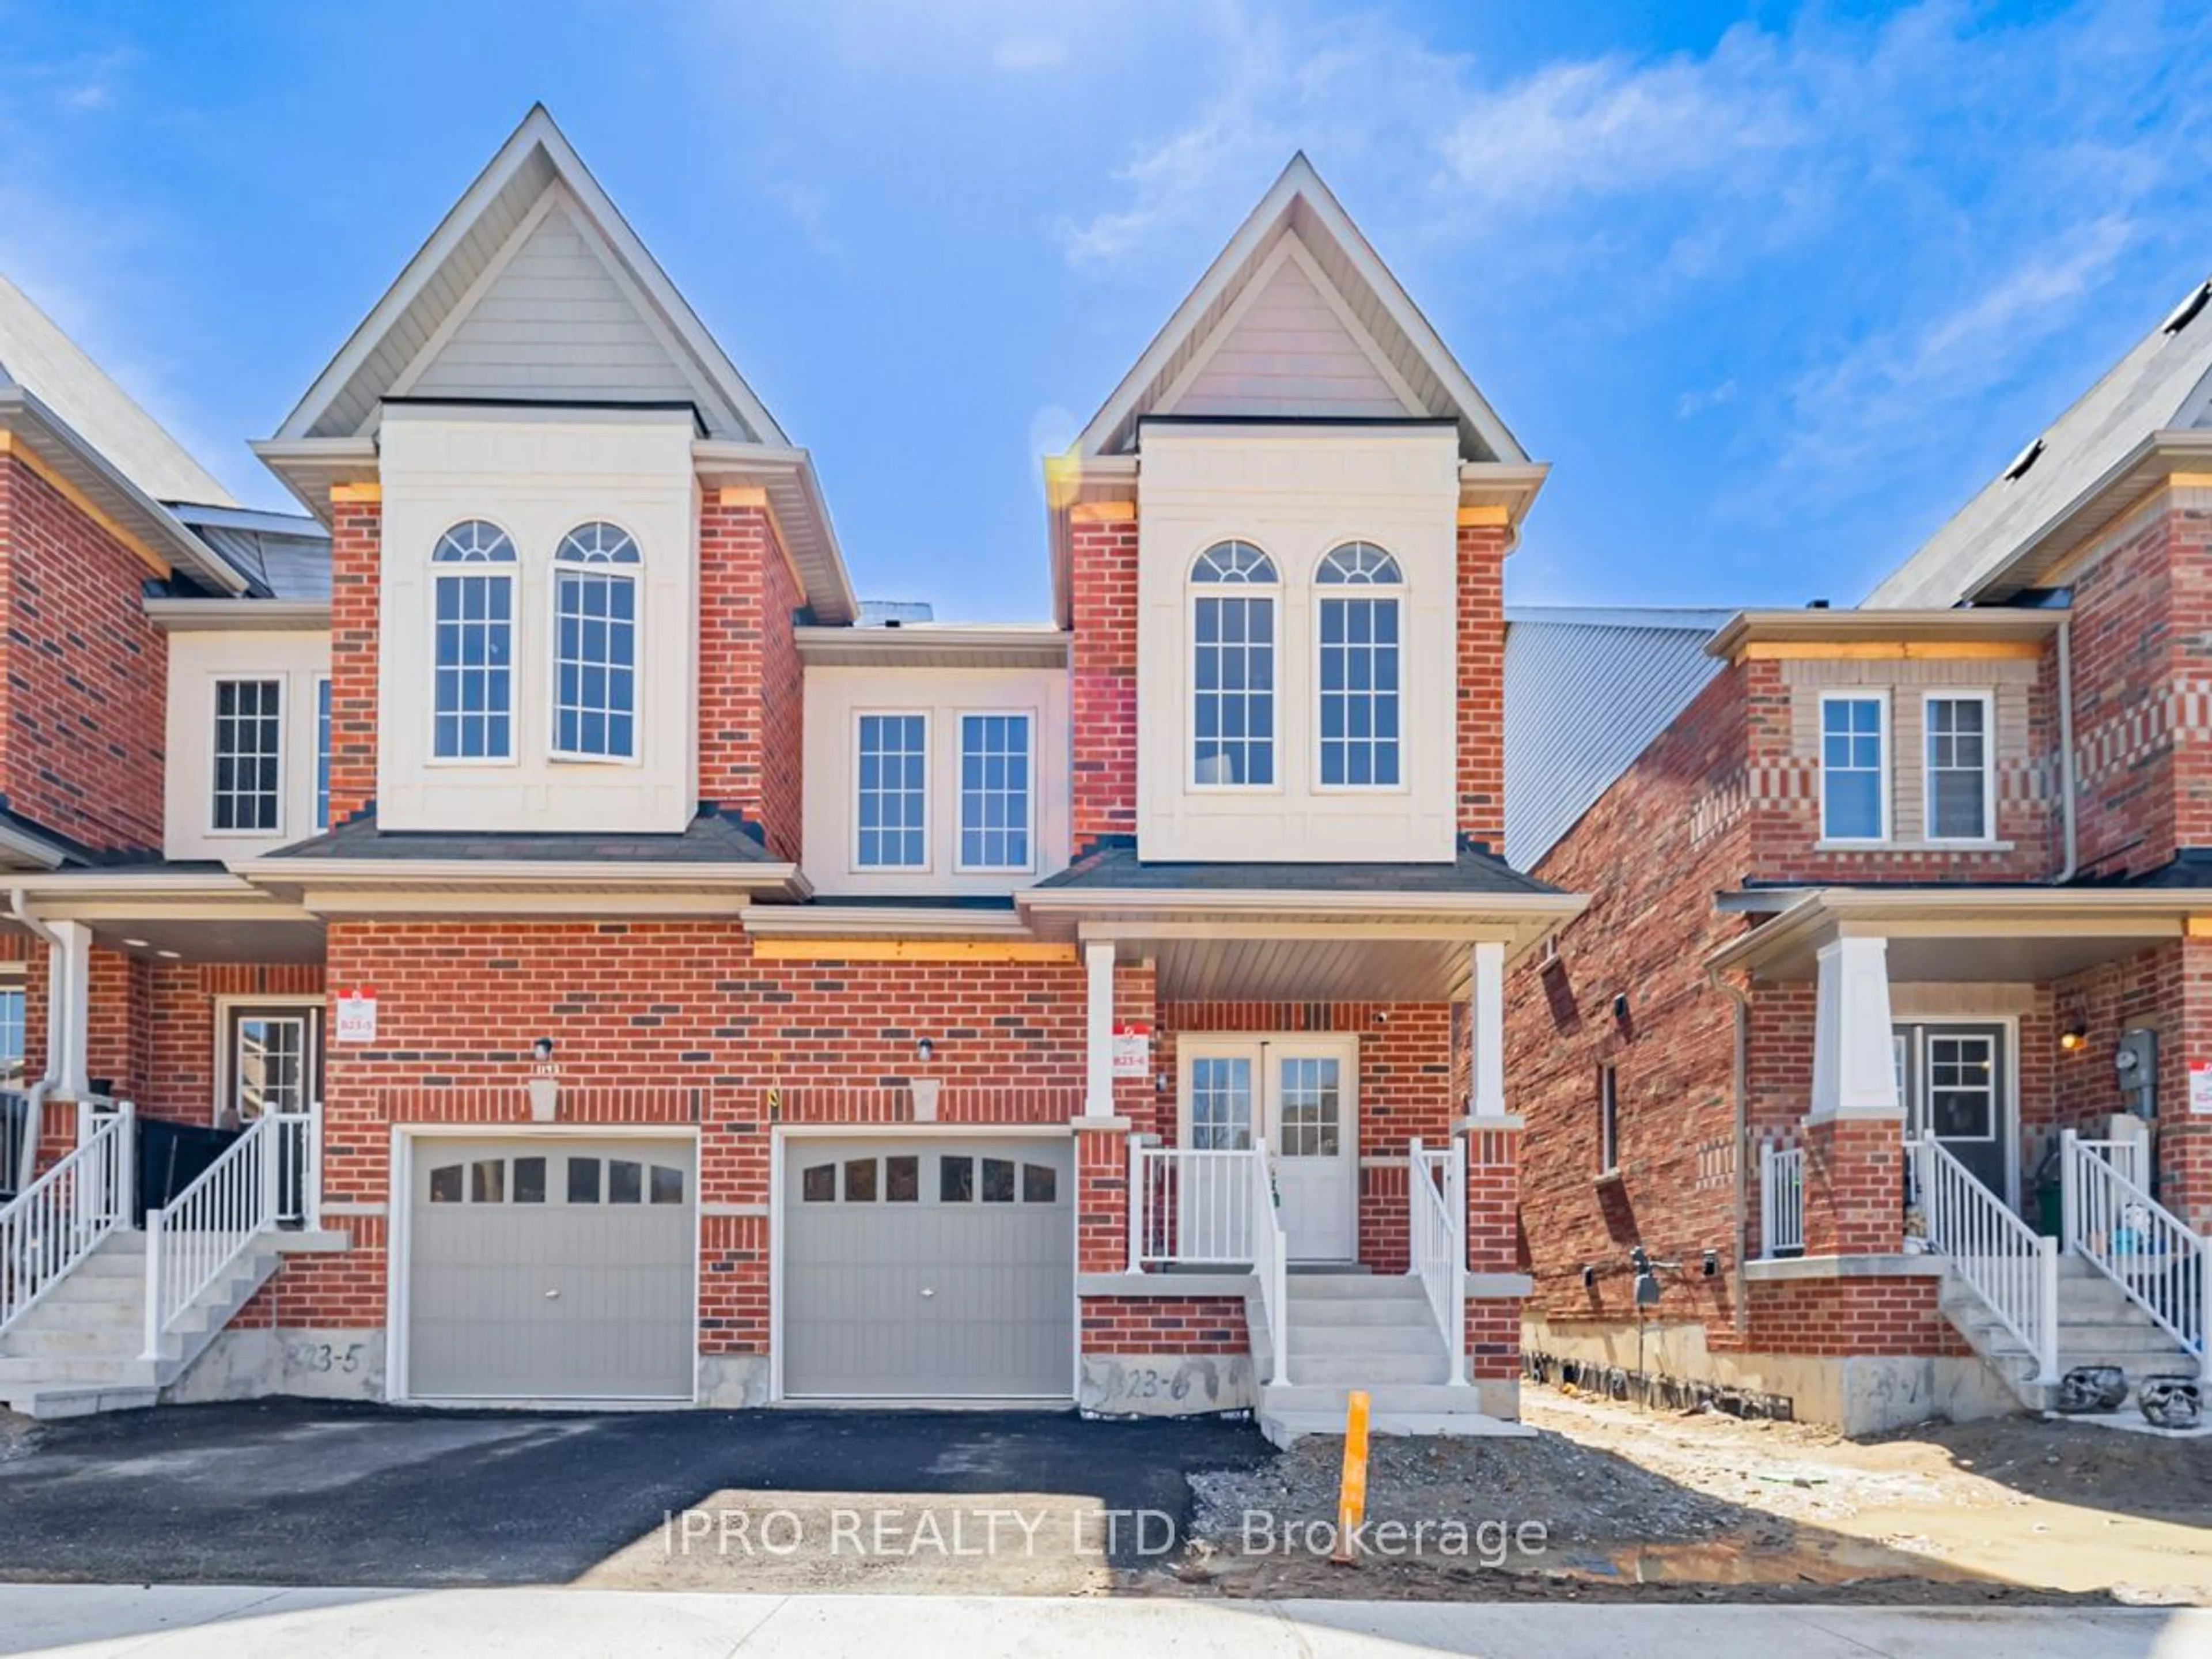 Home with brick exterior material for 1191 Kettering Dr, Oshawa Ontario L1K 1A6